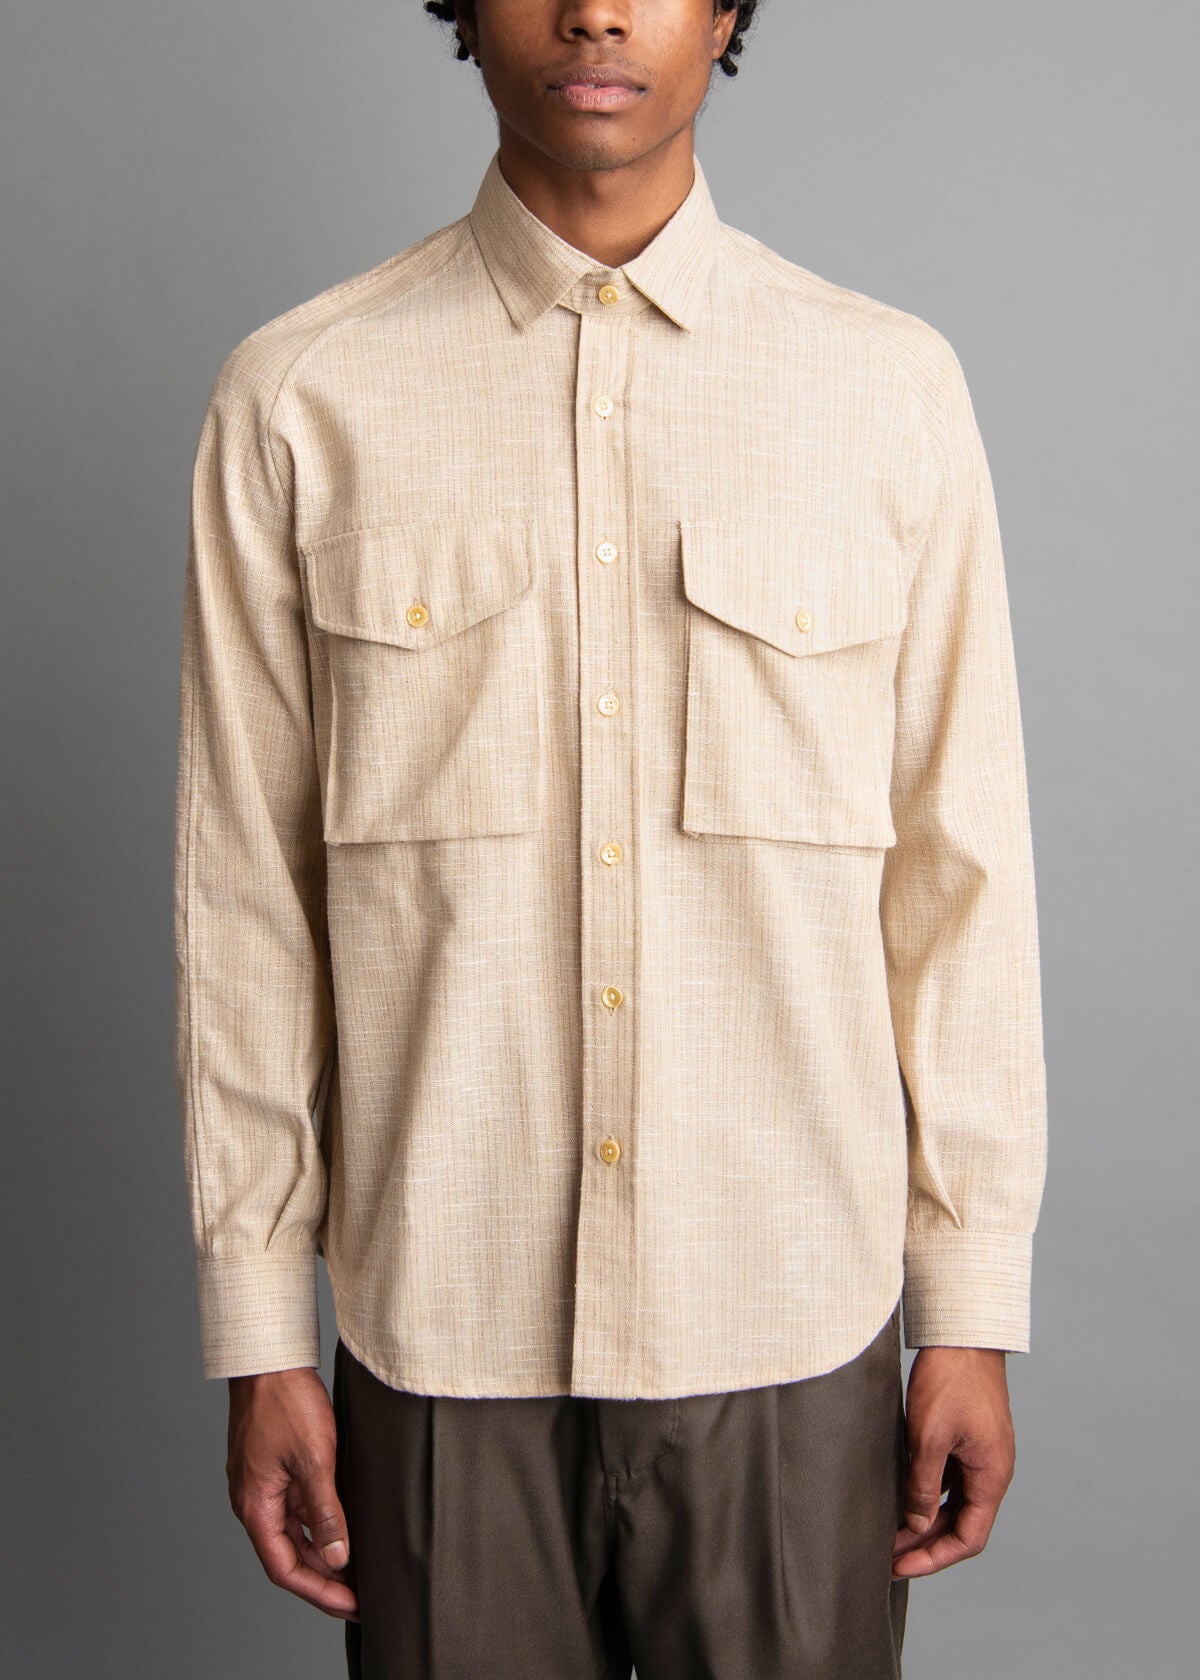 relaxed fit cream colored men's shirt